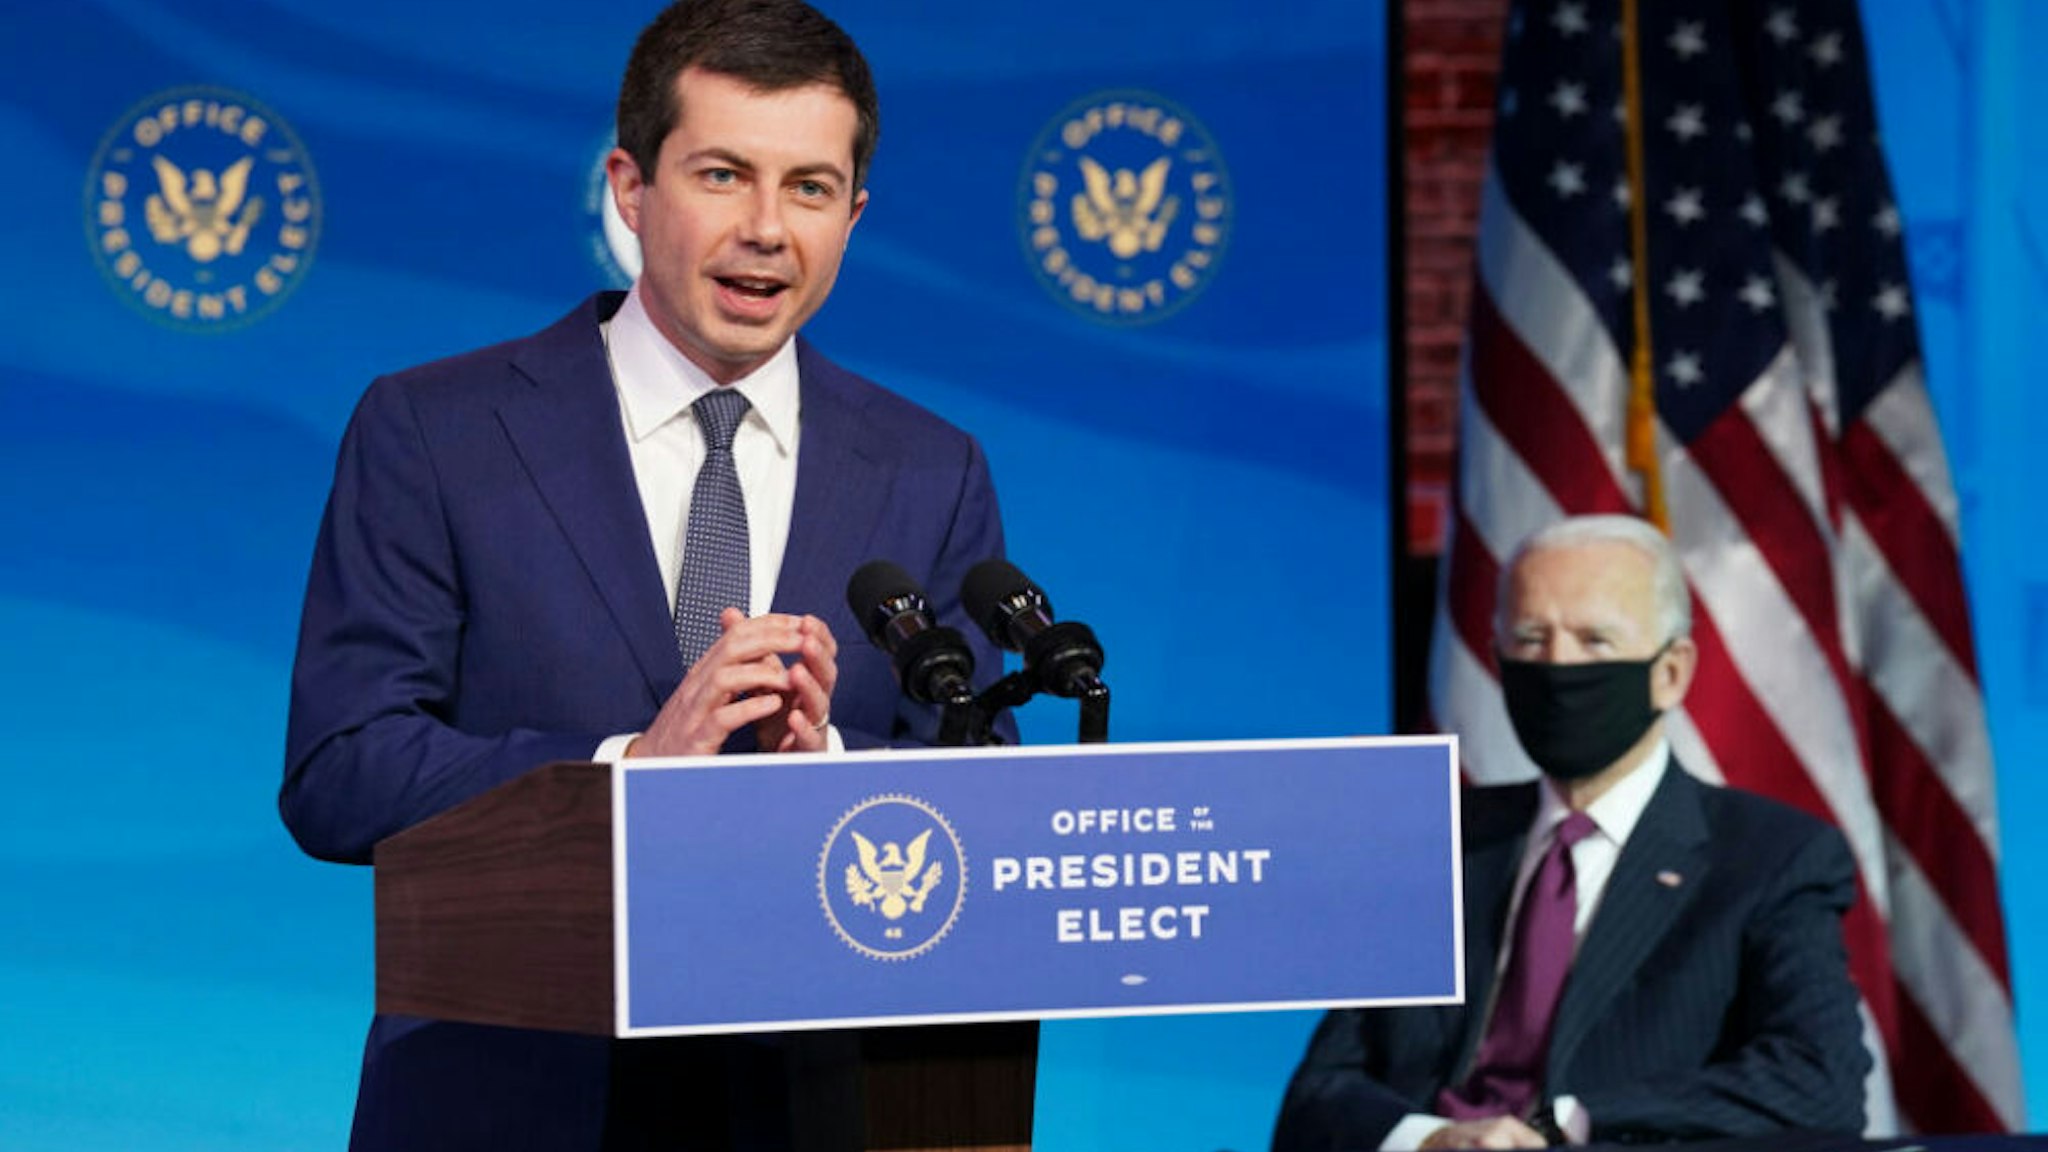 WILMINGTON, DELAWARE - DECEMBER 16: Former Democratic presidential candidate Pete Buttigieg speaks as U.S. President-elect Joe Biden (R) looks on after he was nominated to be Secretary of Transportation during a news conference at Biden's transition headquarters on December 16, 2020 in Wilmington, Delaware.